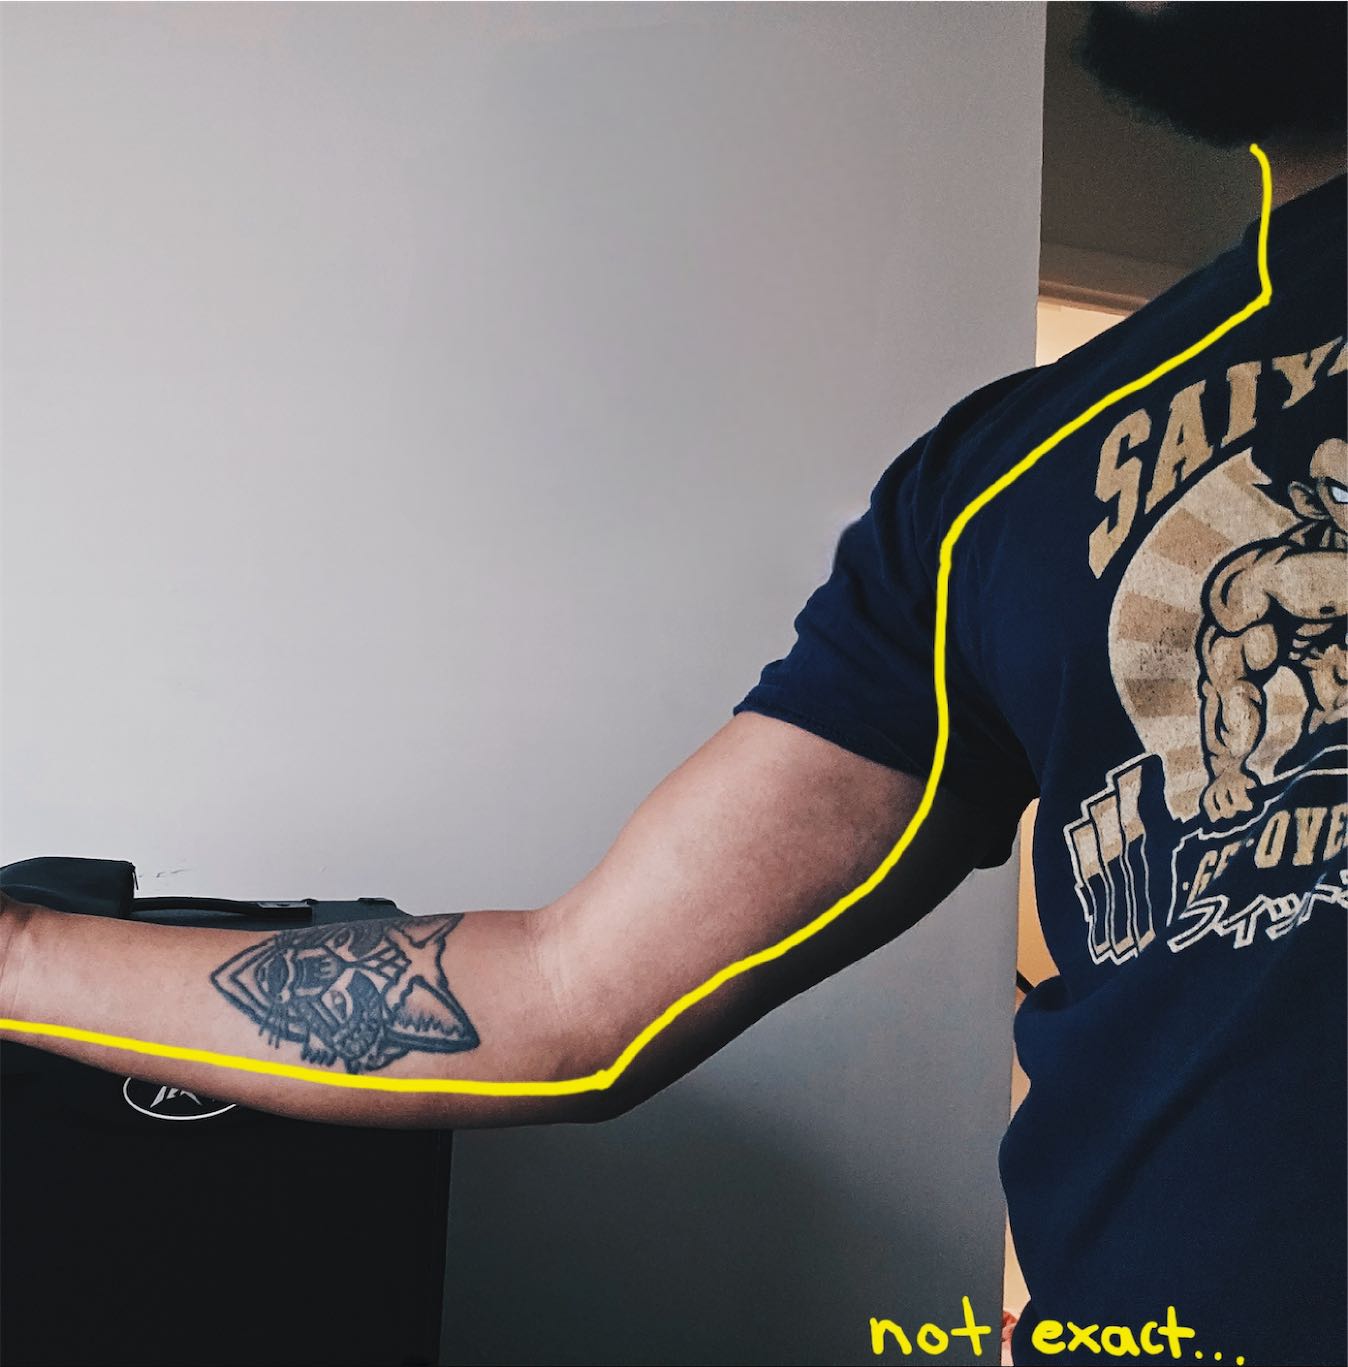 Annotated photo of a close up of my right arm, with another nerve tracing in yellow. It says “not exact…” in the corner to imply the tracing is not exactly path of the nerve